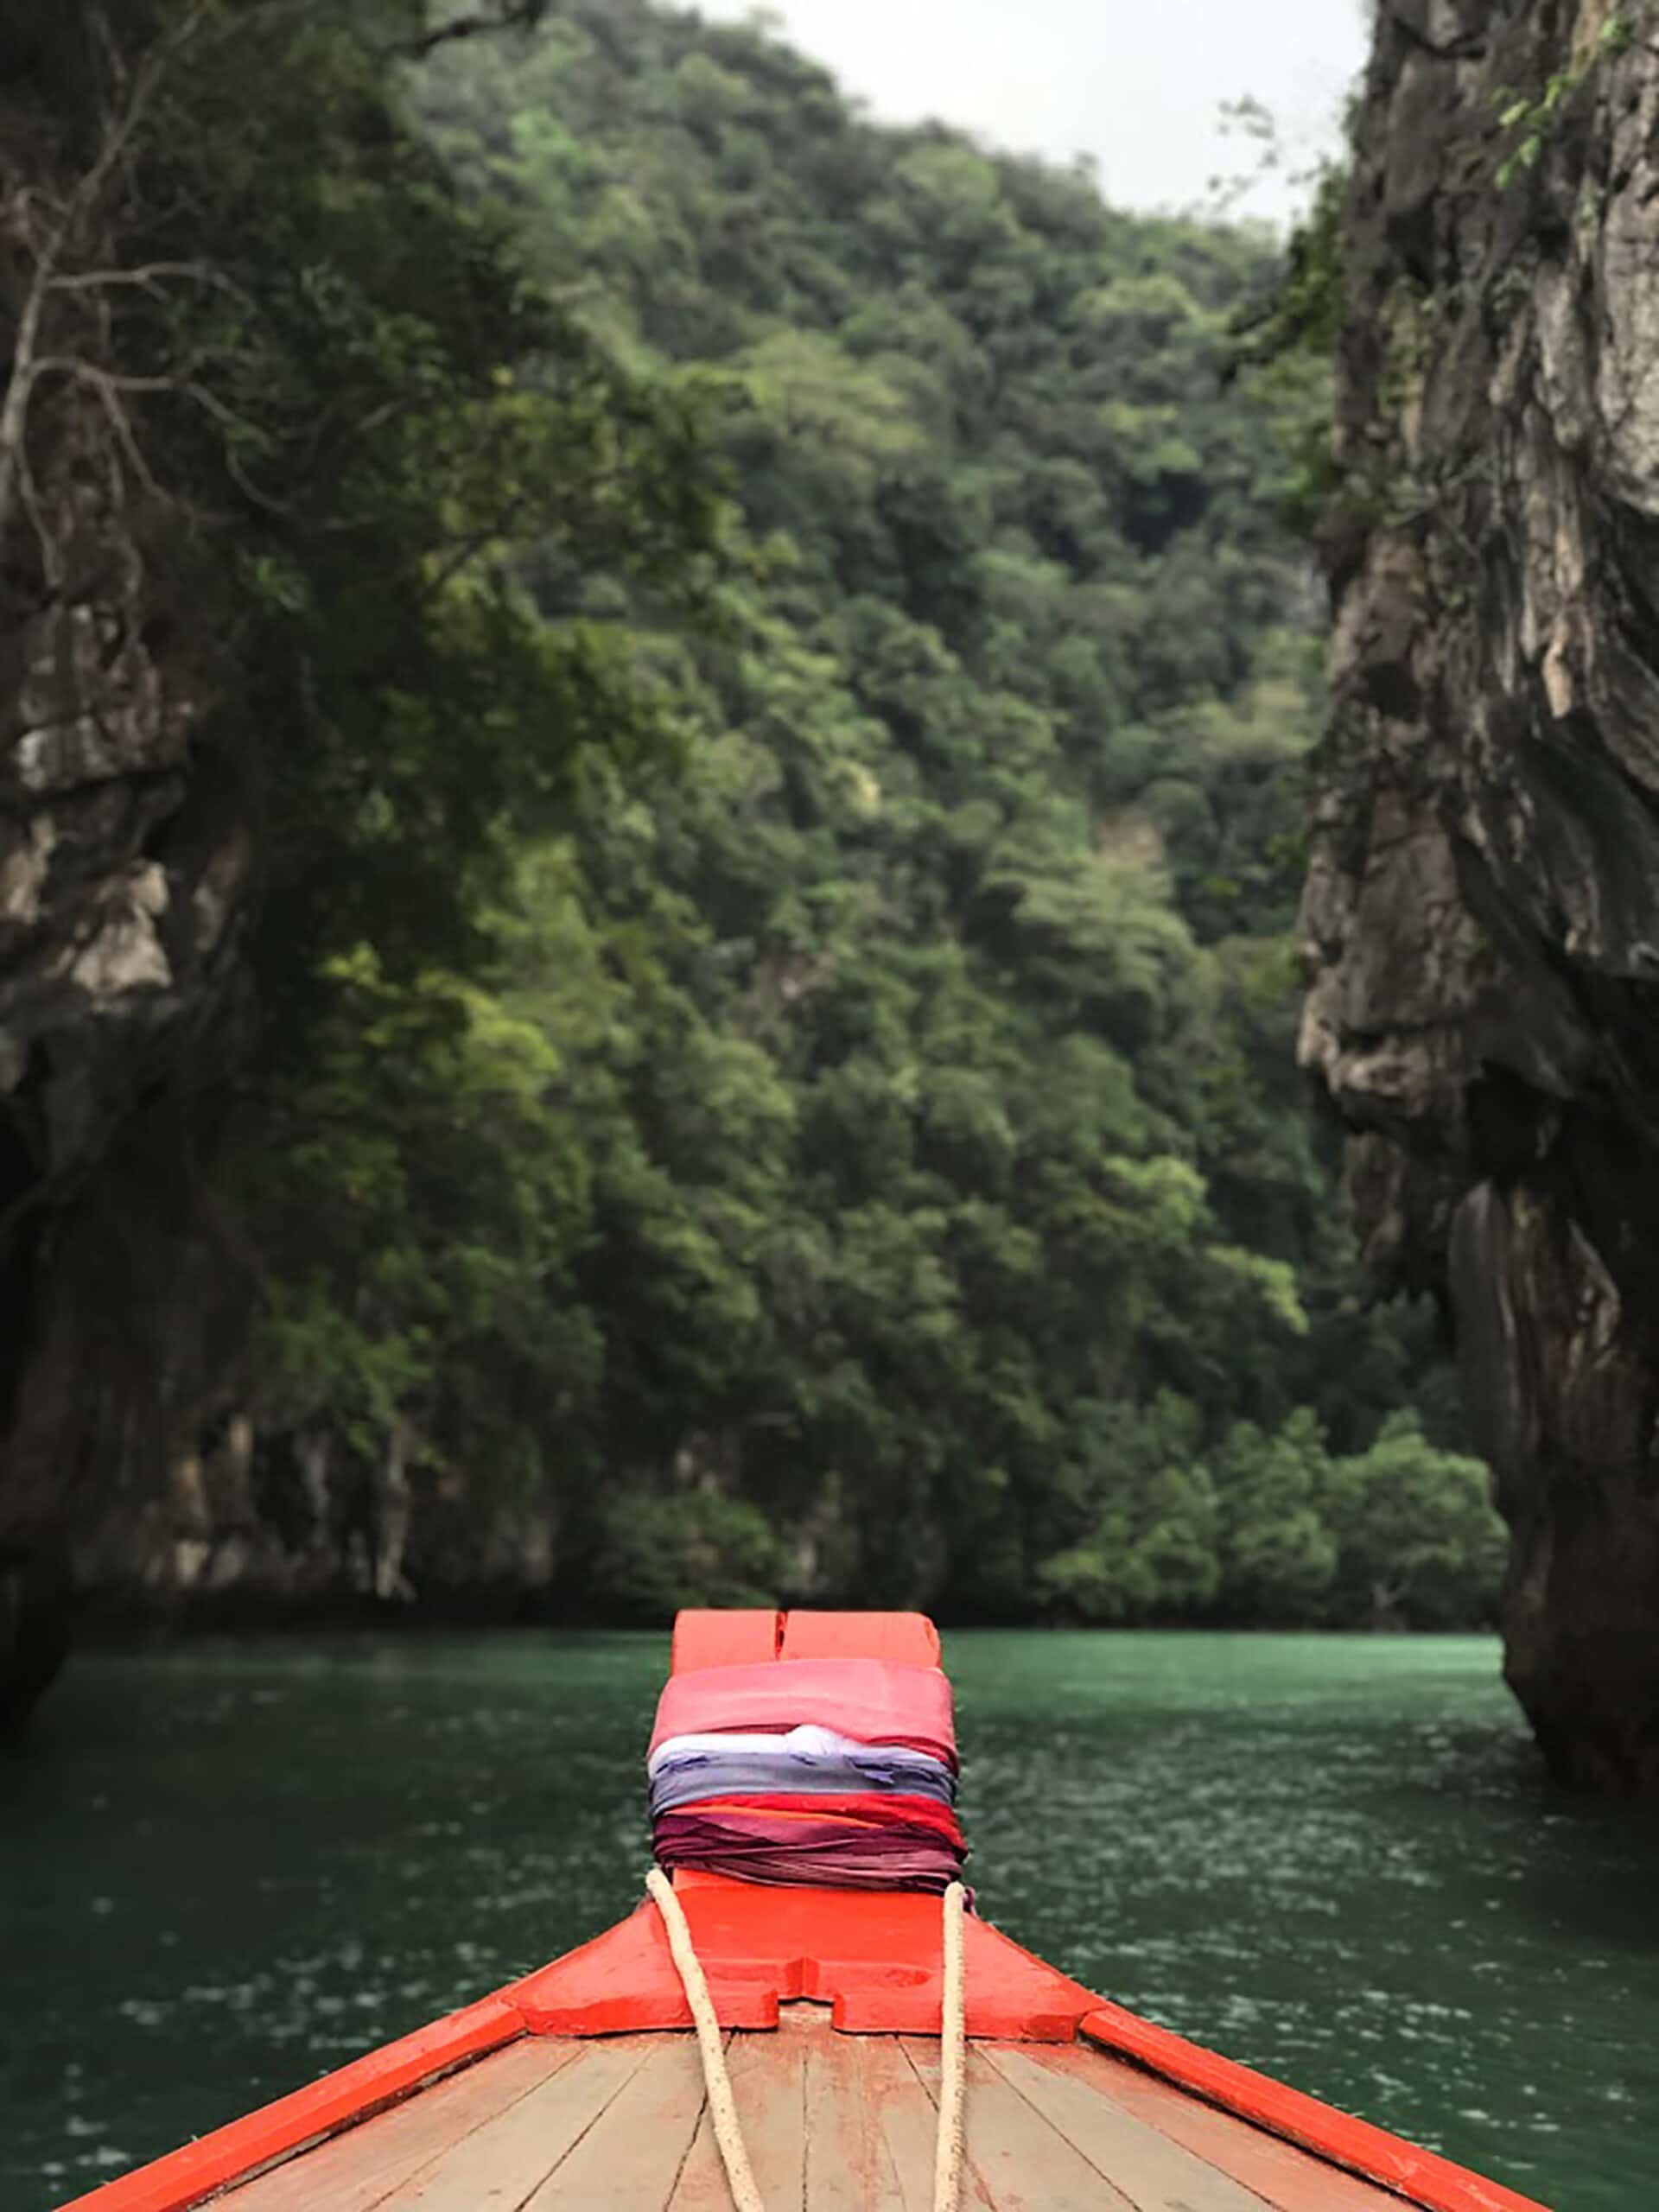 Getting around in Thailand by Longtail boat